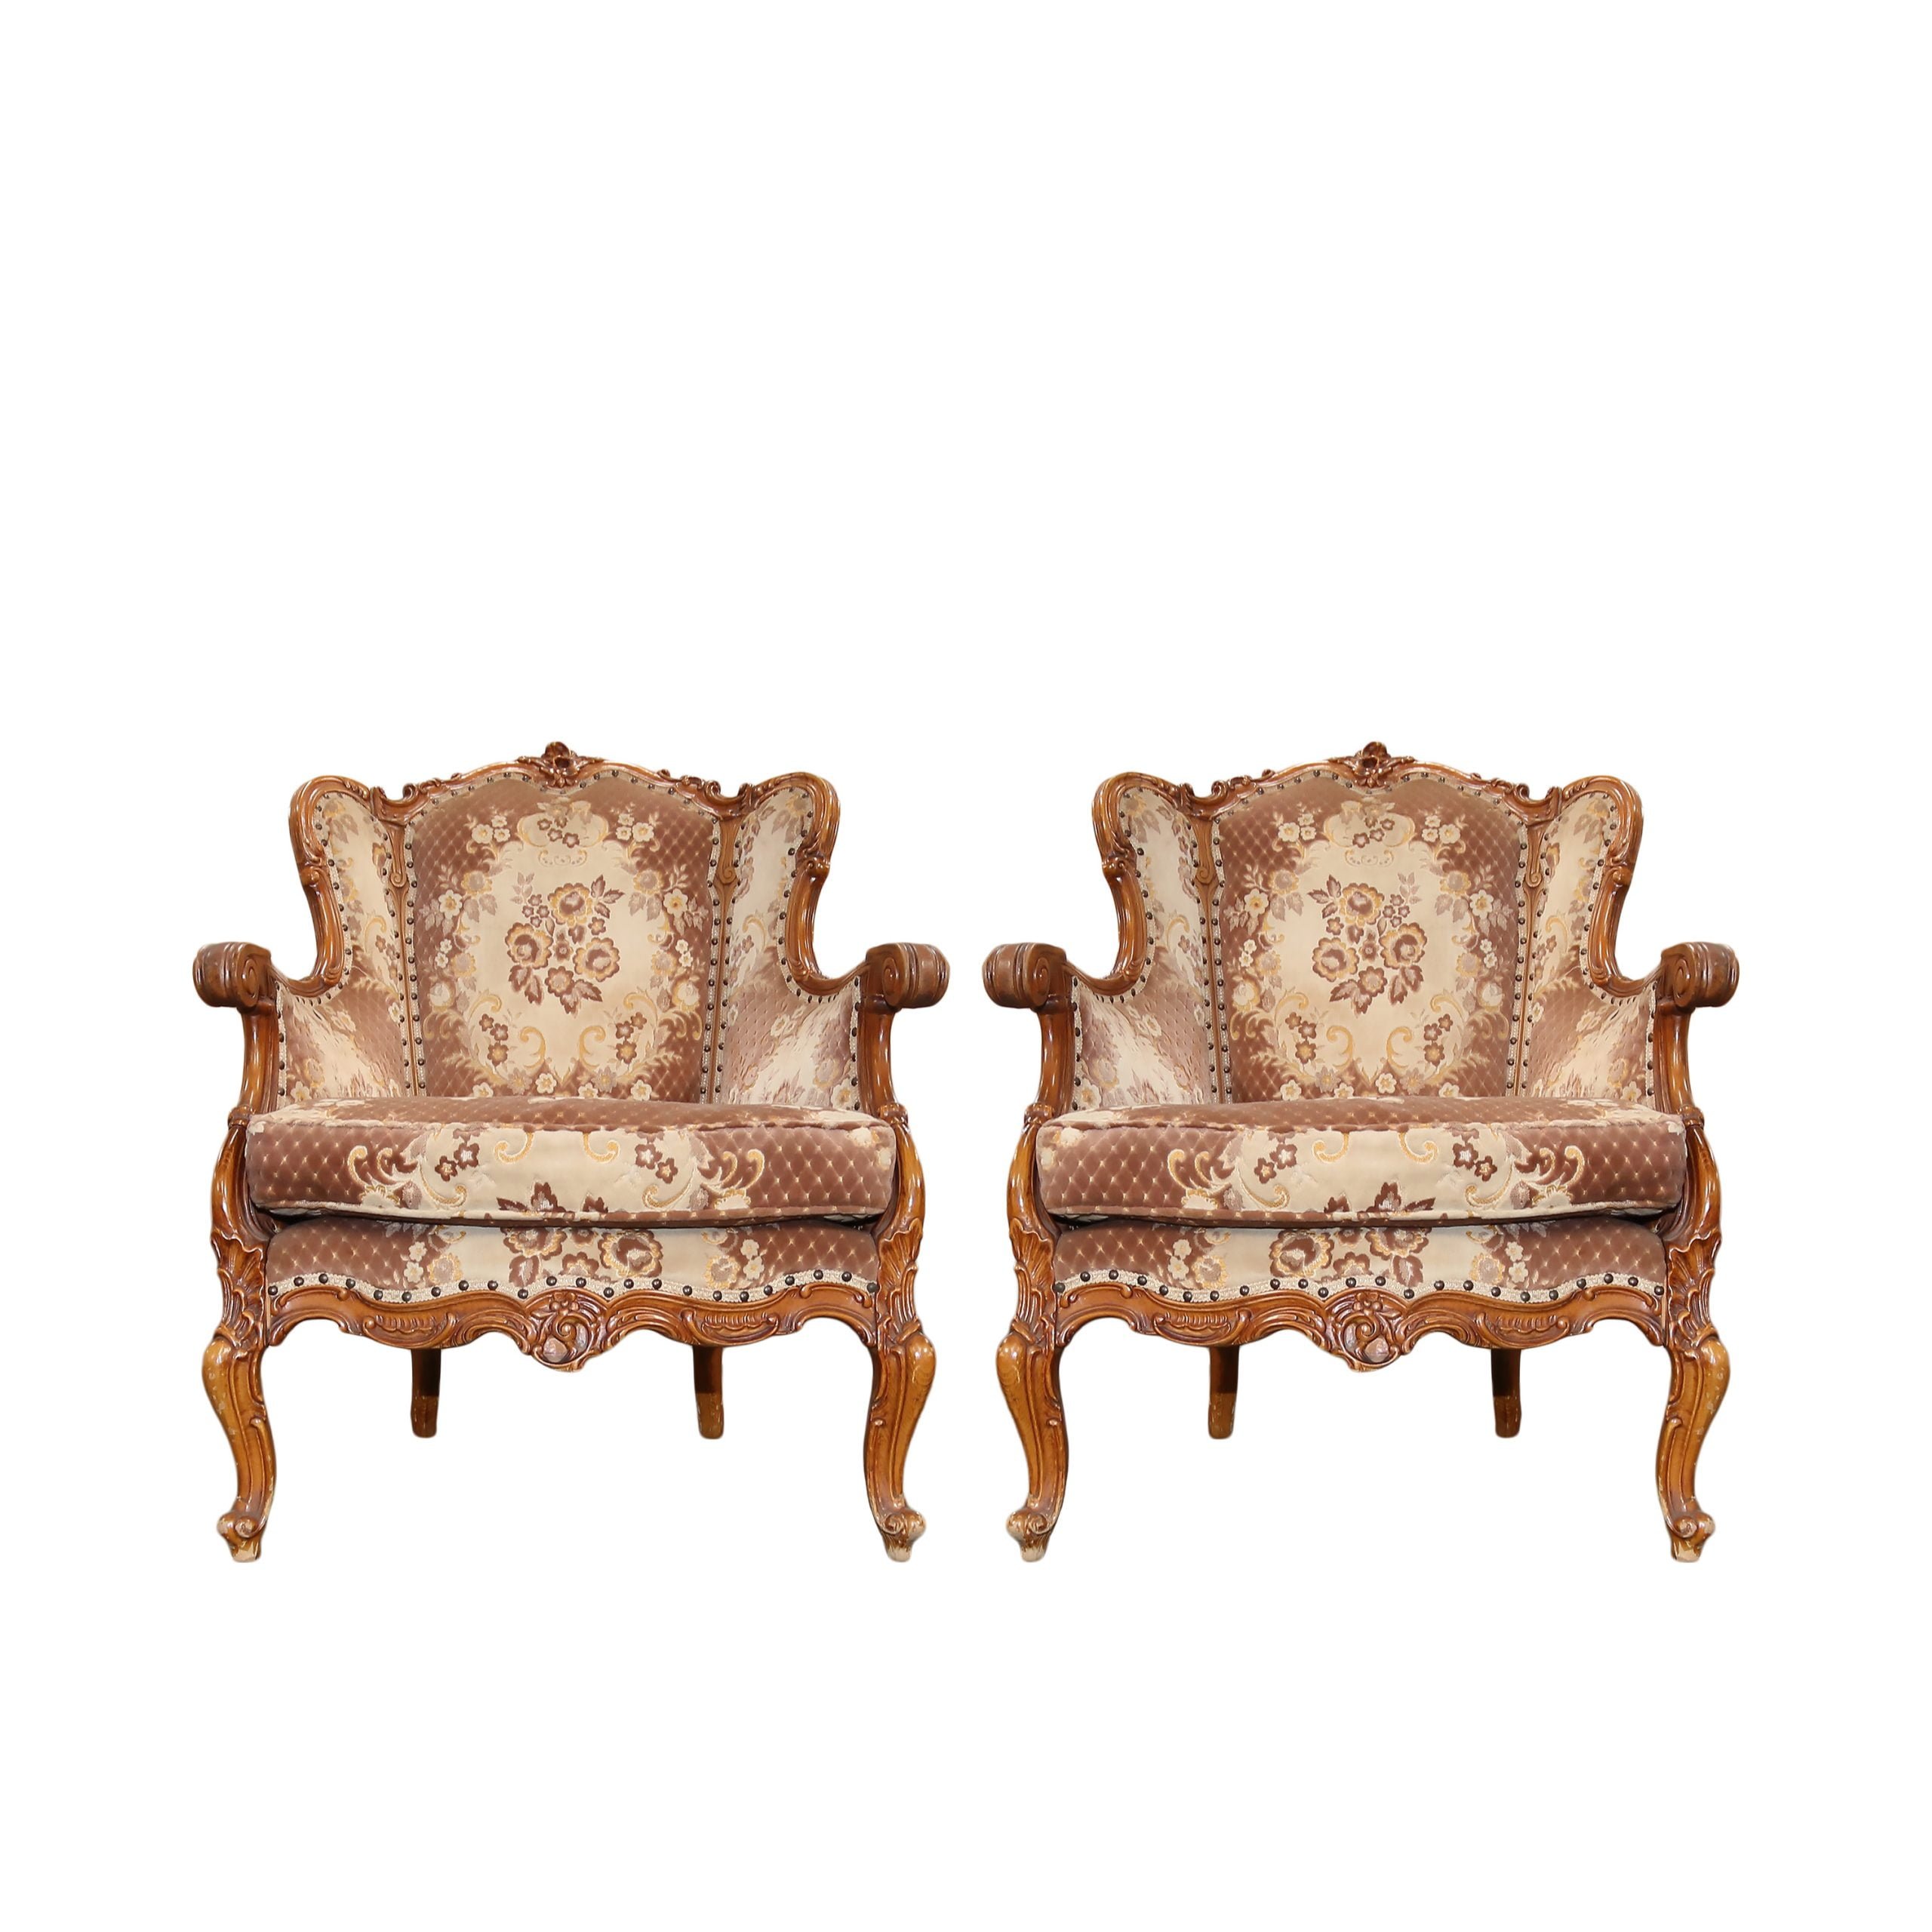 20th century carved antique French chairs